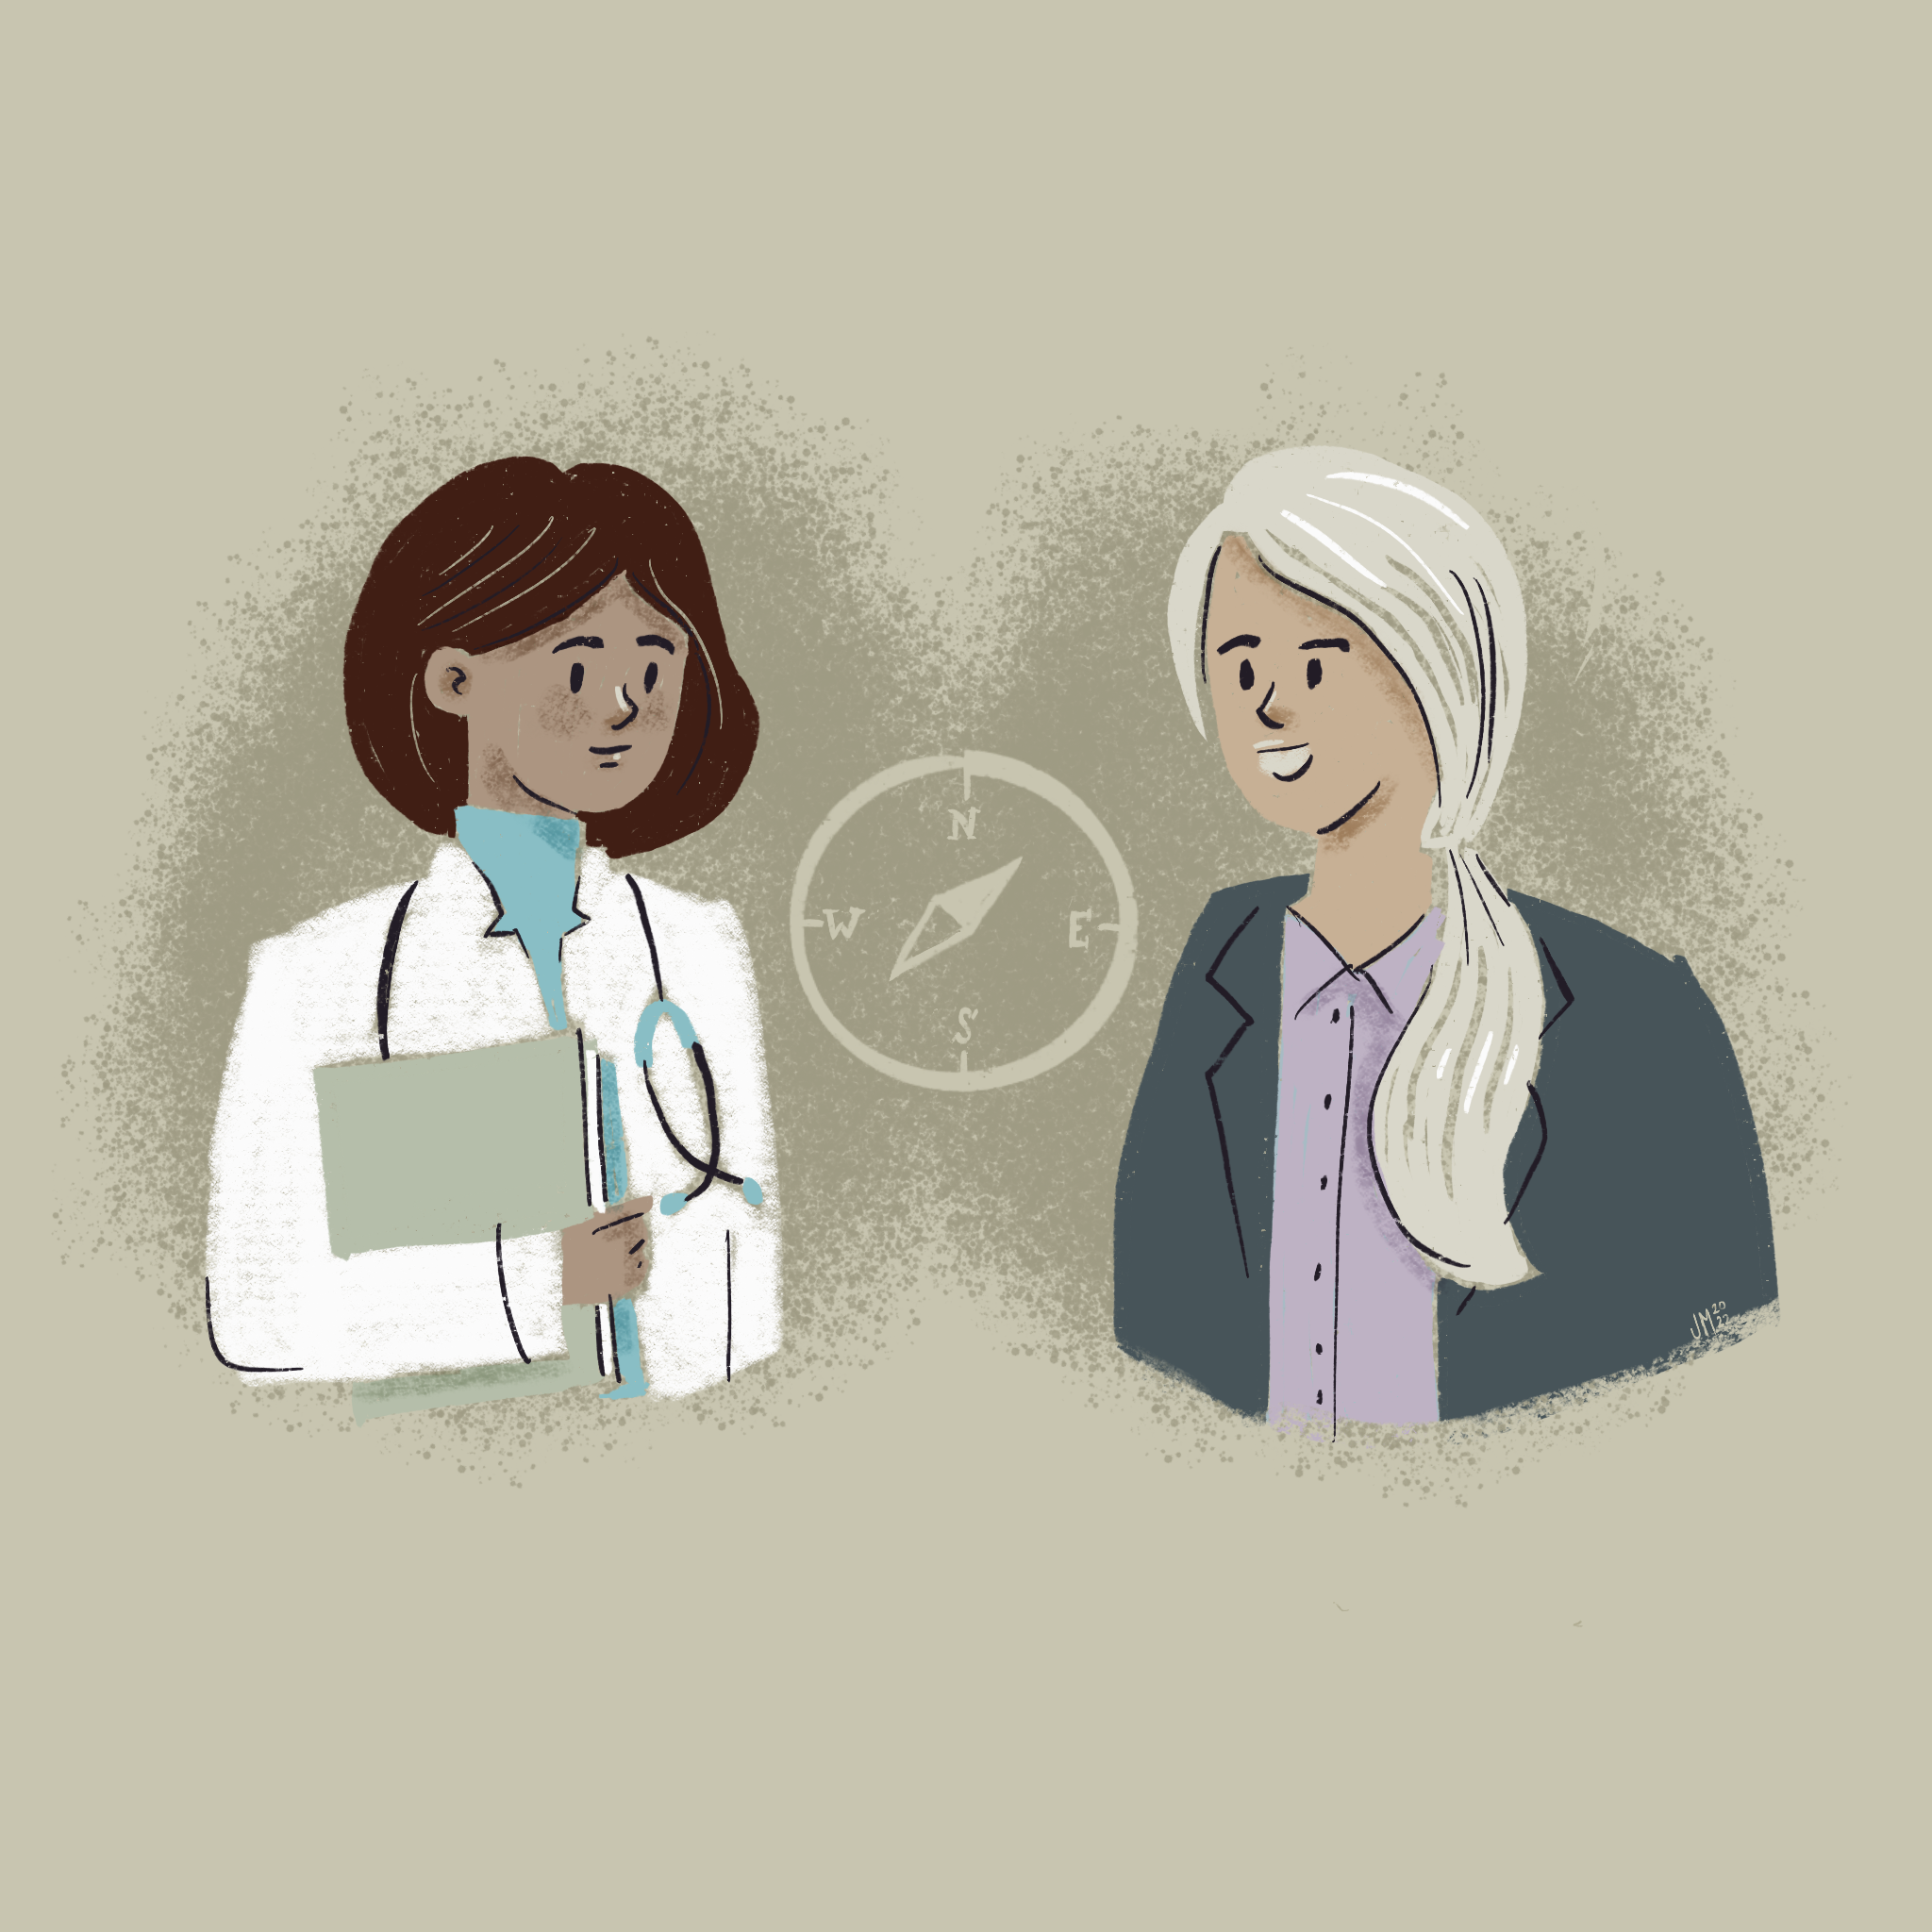 Illustration of psychiatrist and psychologist with a compass between them, symbolizing the direction to follow for a mental health career